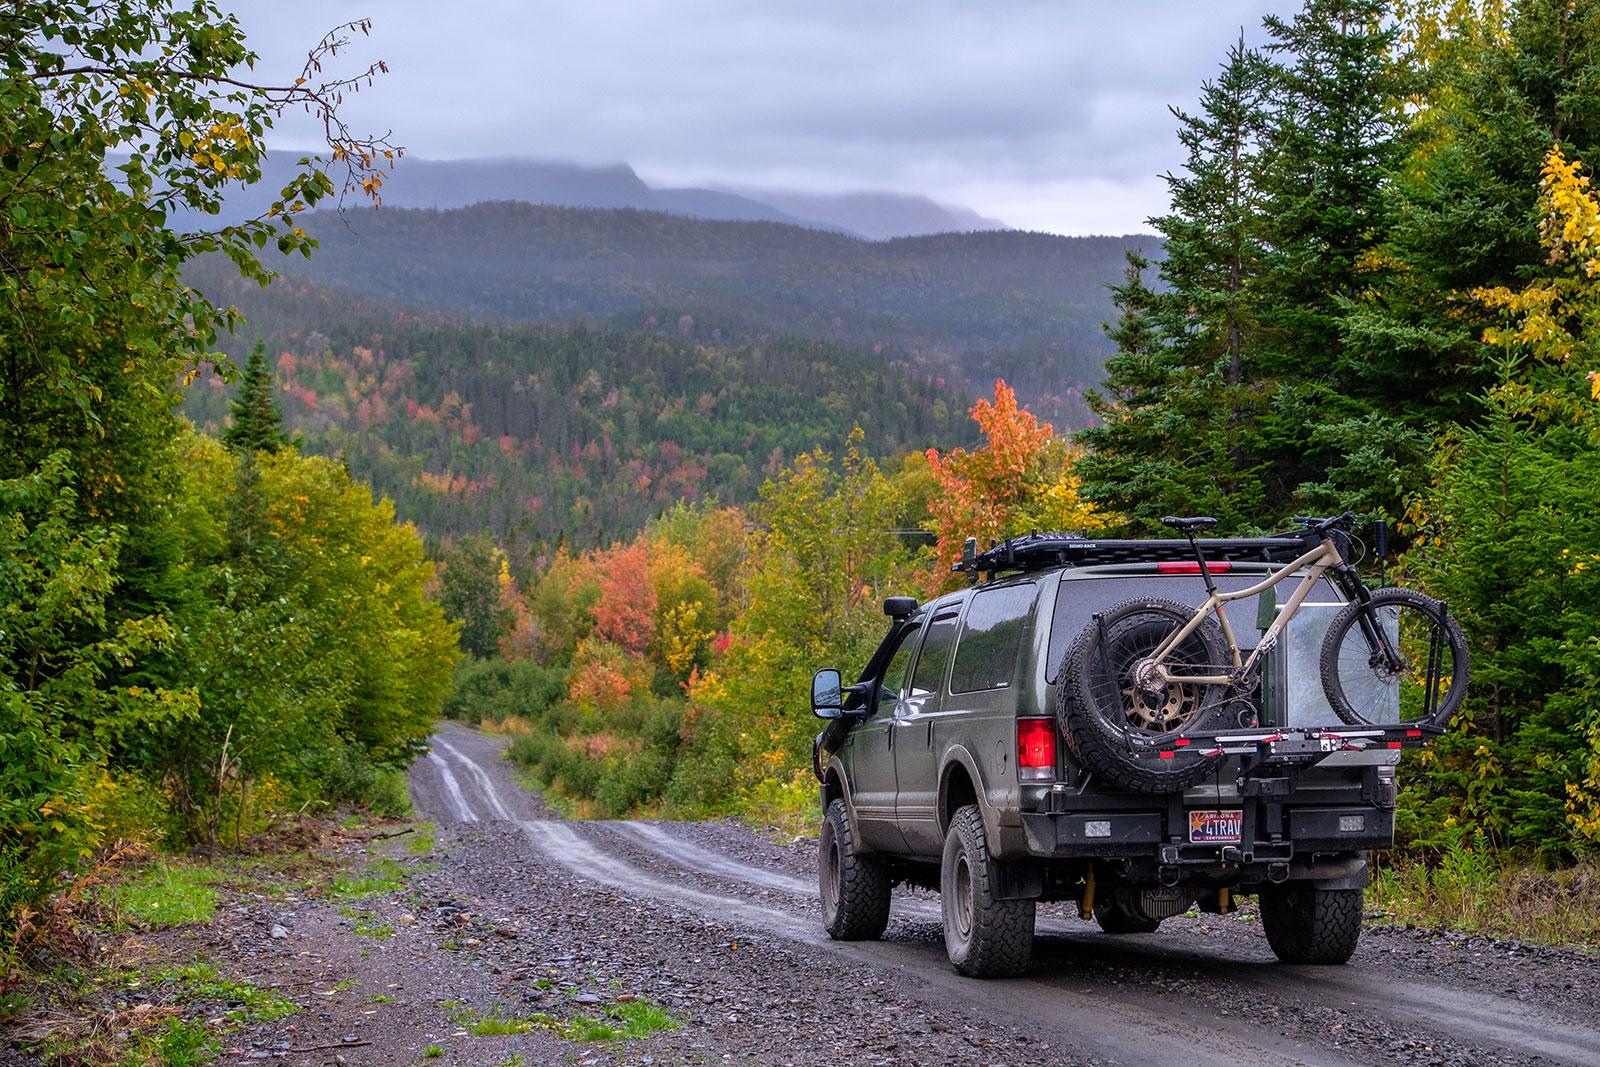 4WD off road vehicle on a trail in the mountains. Photo Credit: Chris Cordes